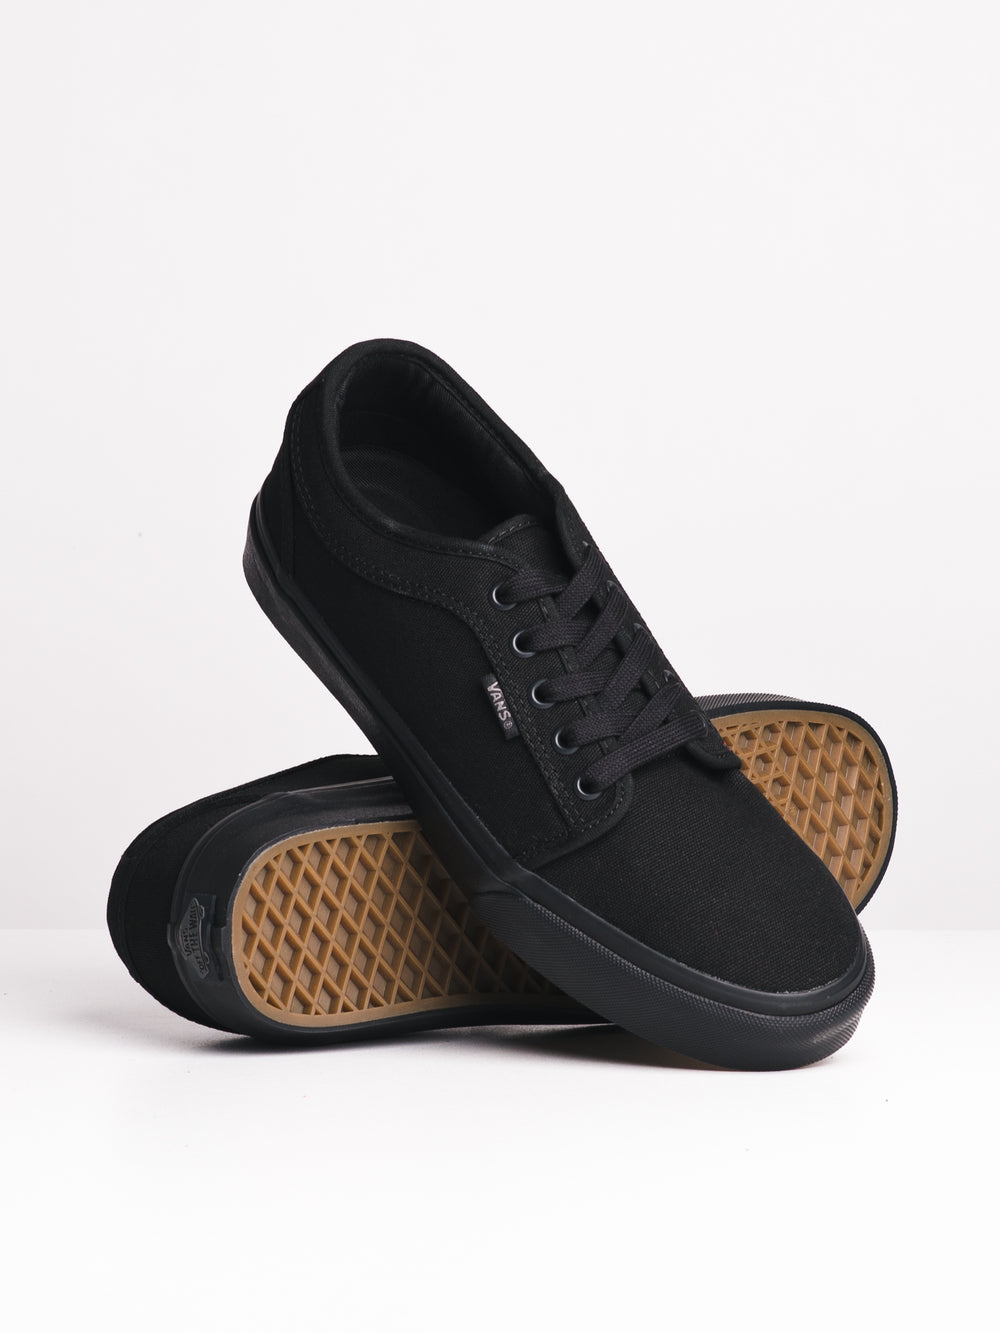 CHAUSSURES CHUKKA LO BLACKOUT POUR HOMME